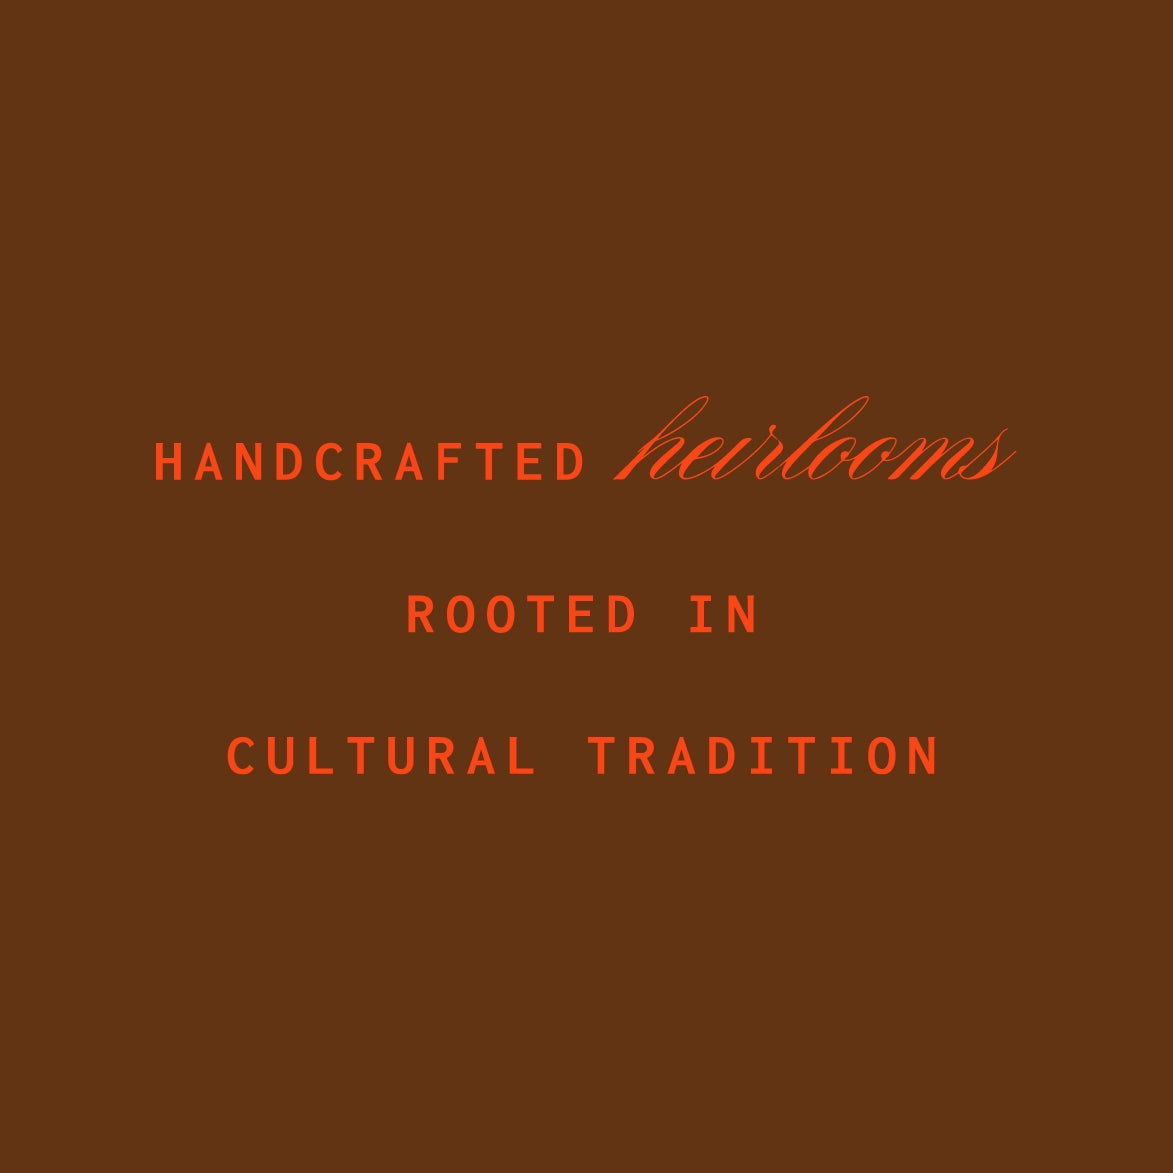 Raine Waistbeads Tagline that says "Handcrafted heirlooms rooted in cultural tradition"